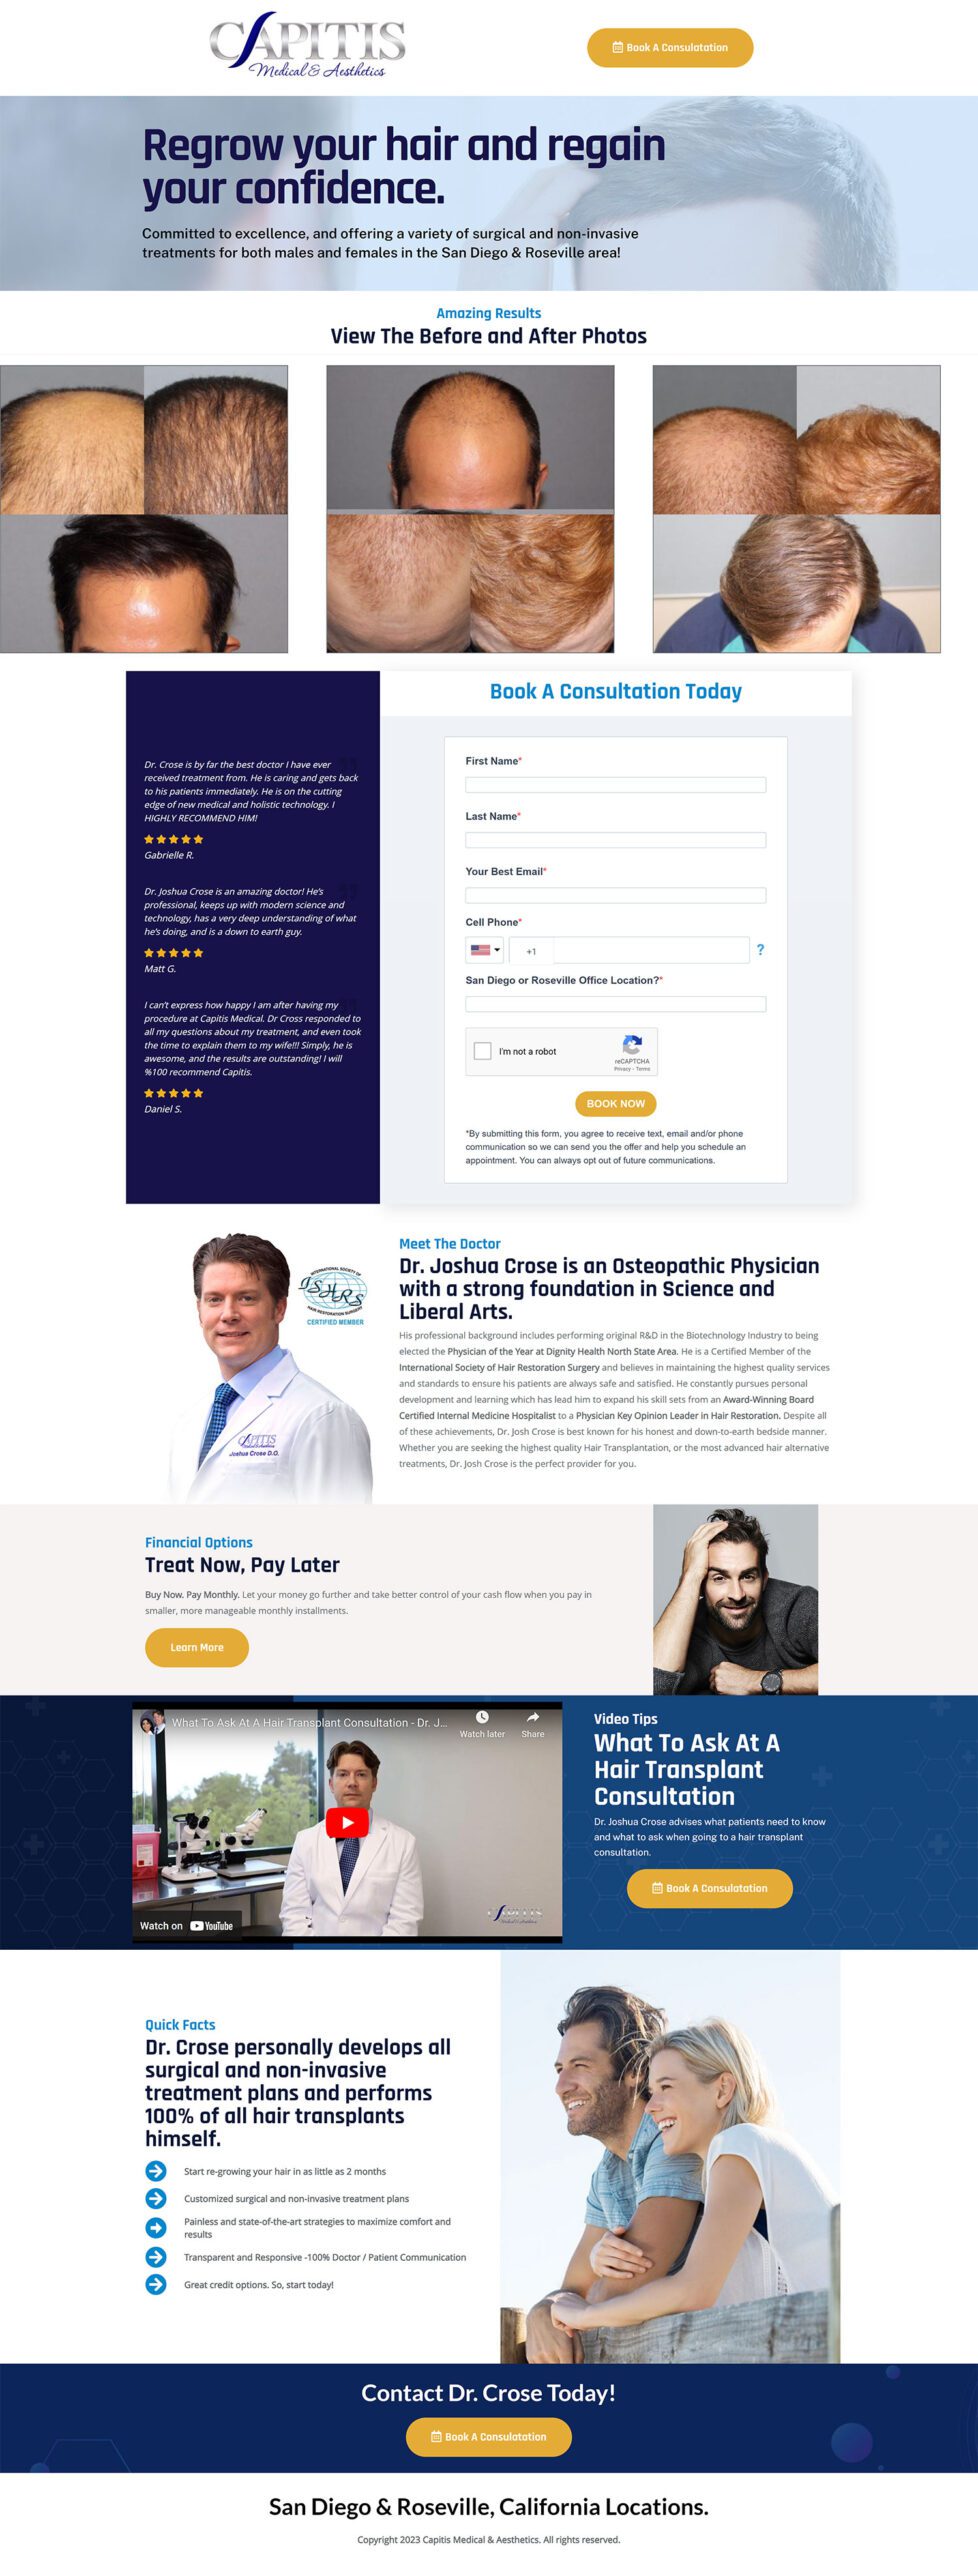 capitis medical landing page example